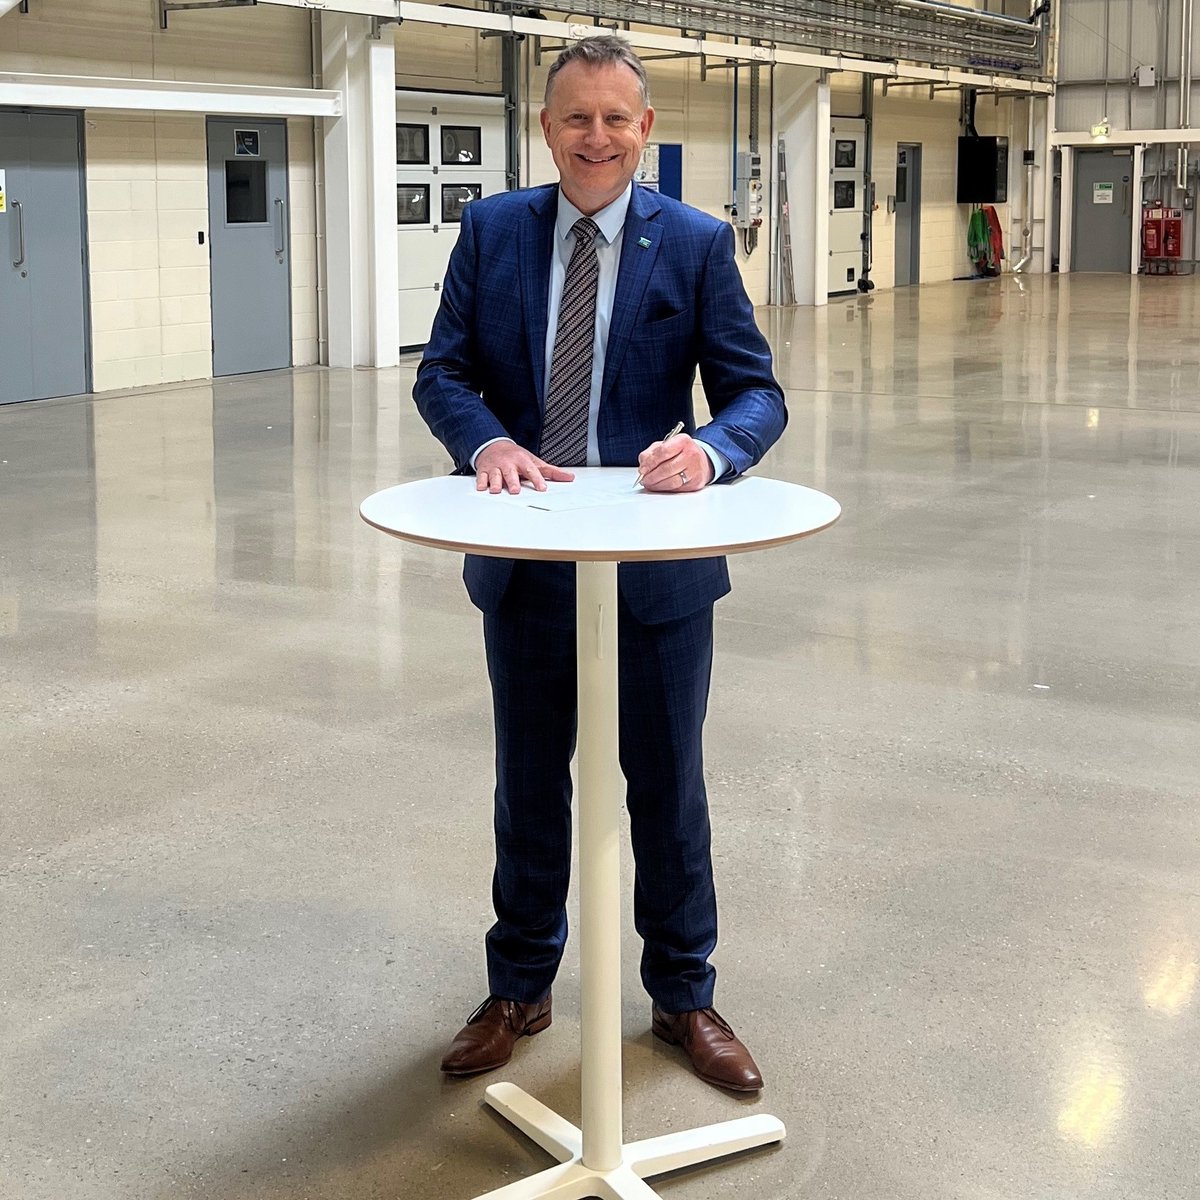 “MTC started life in a portacabin in 2011. Under the leadership of @DrCliveHickman it grew into a 1000 employee, £120m turnover business. Today we acquire a new building allowing us to meet ever-increasing demand and continue supporting #UKMfg. Thank you.” - @GrahamHoareMTC